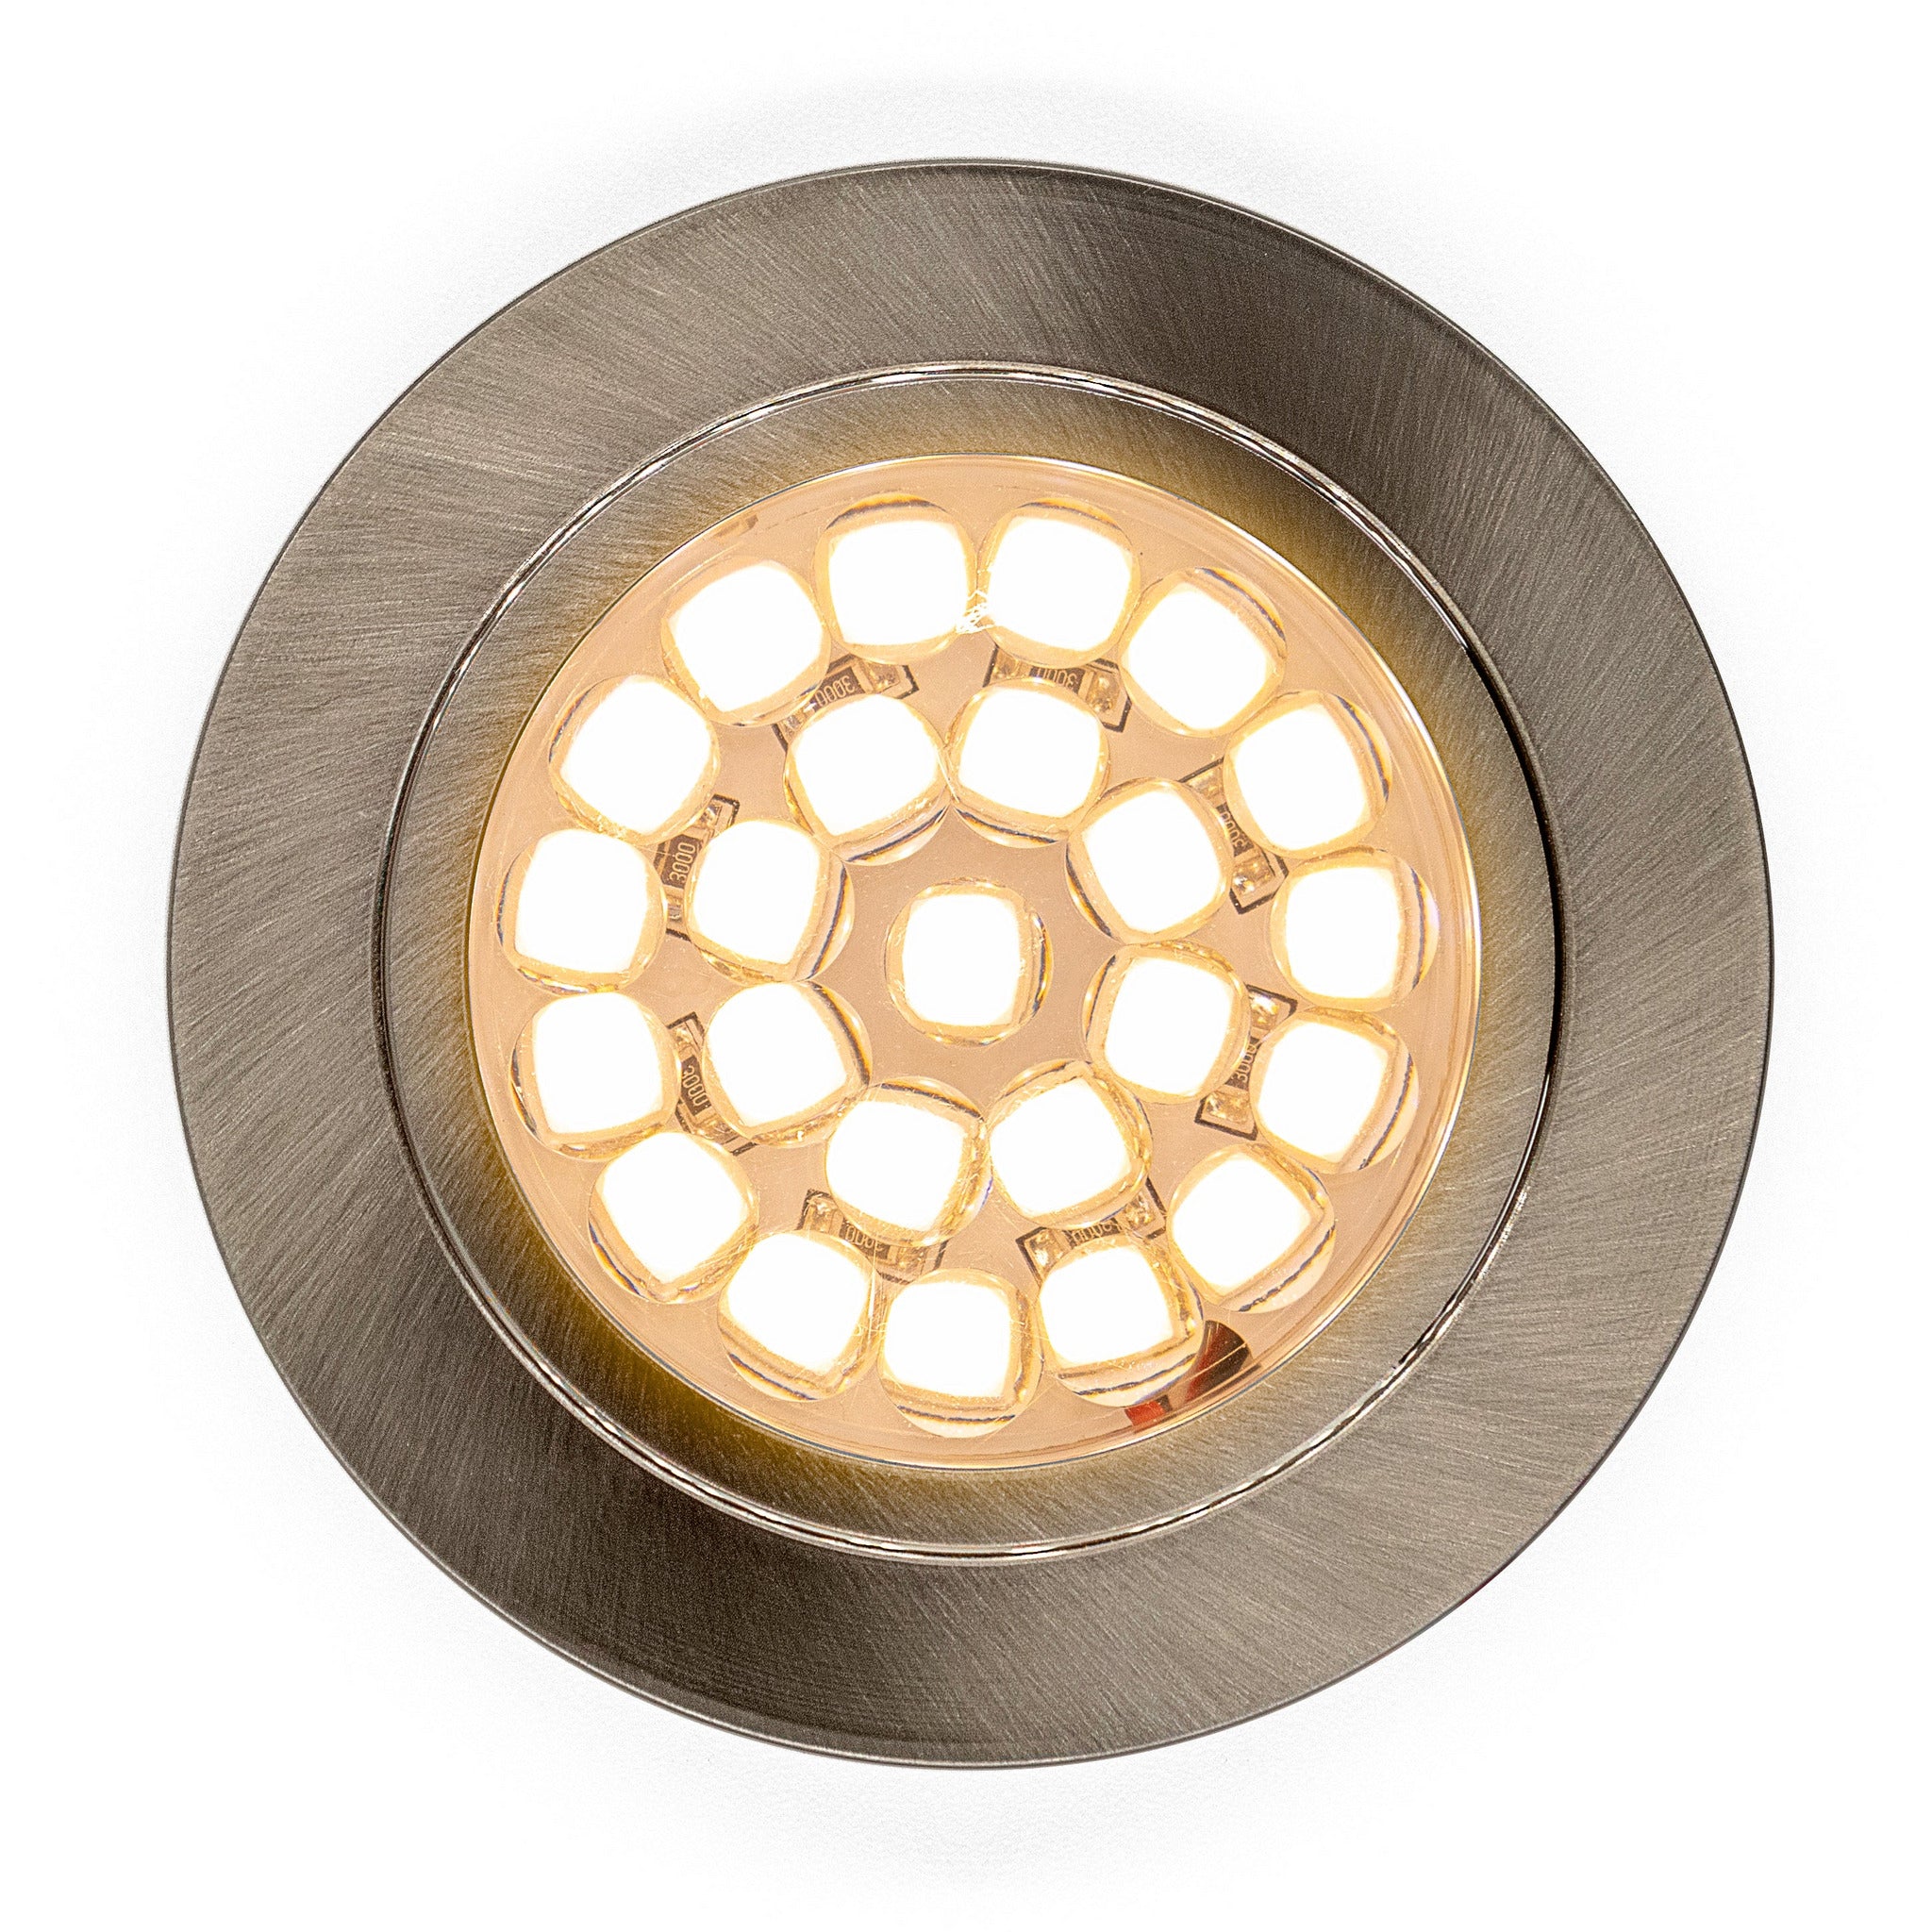 Brushed Nickel 2W 24 LED Recessed Light - Dimmable, Touch On/Off (Warm White) Kiravans 